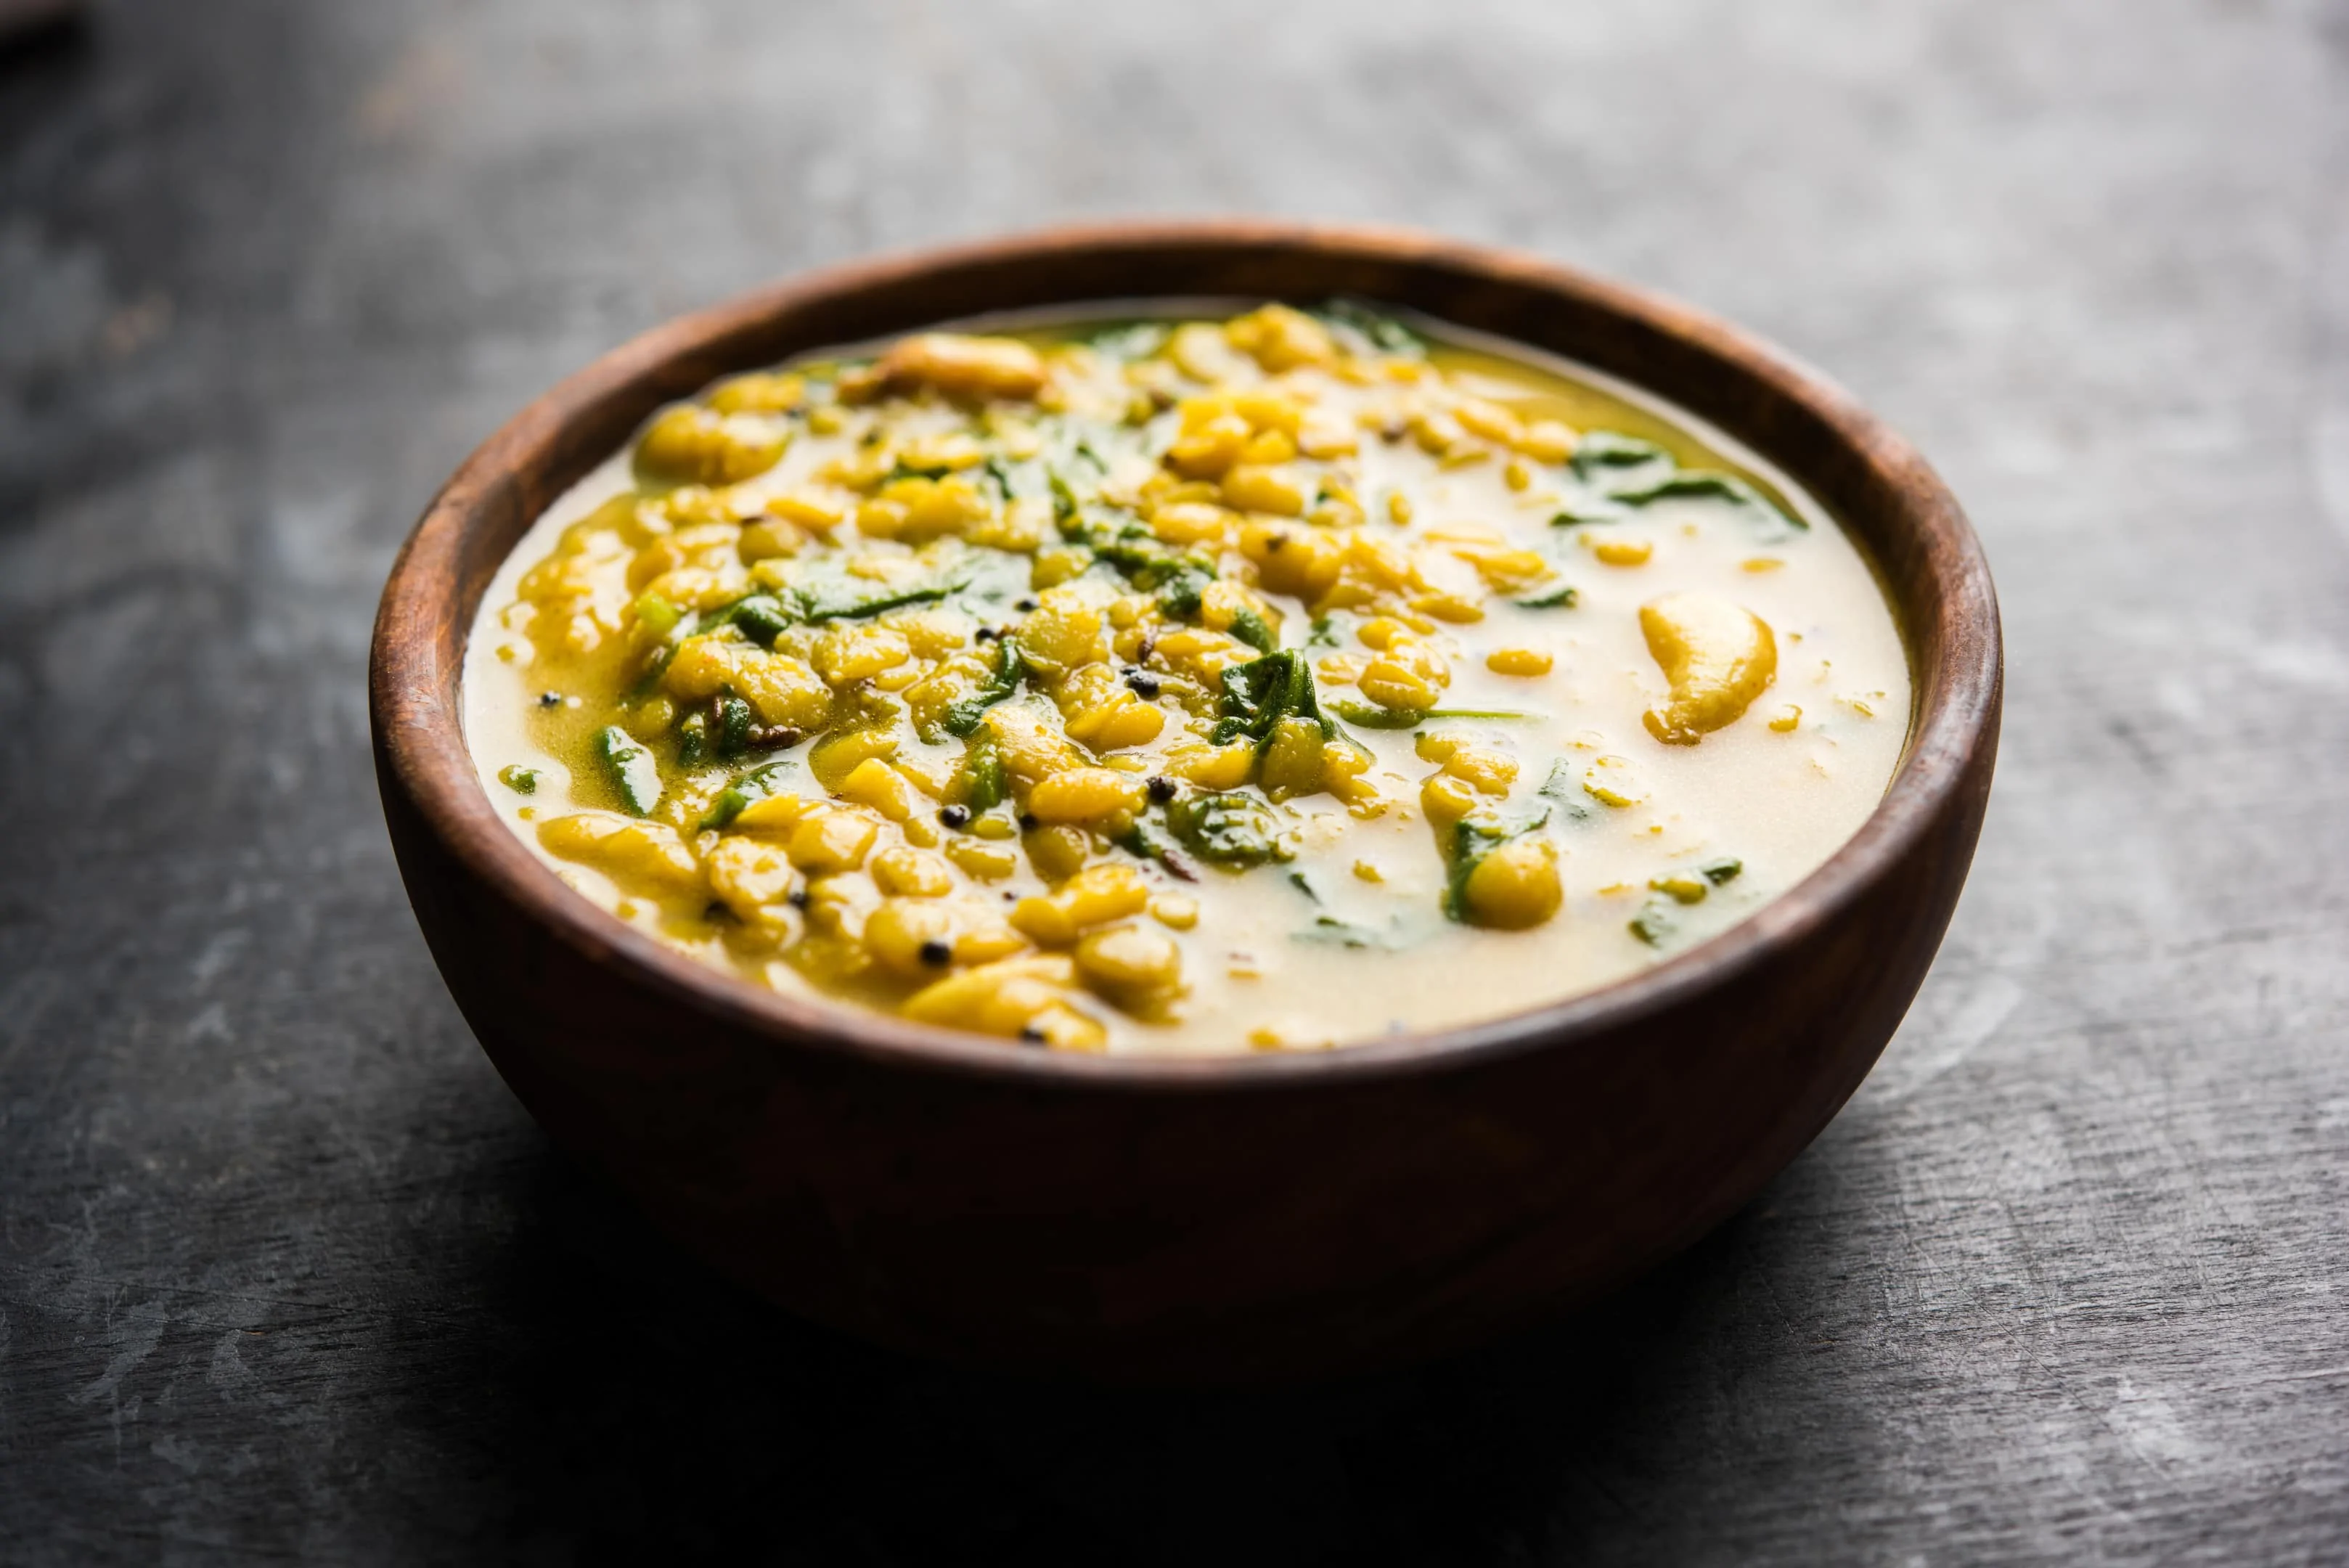 Yellow split peas and spinach soup